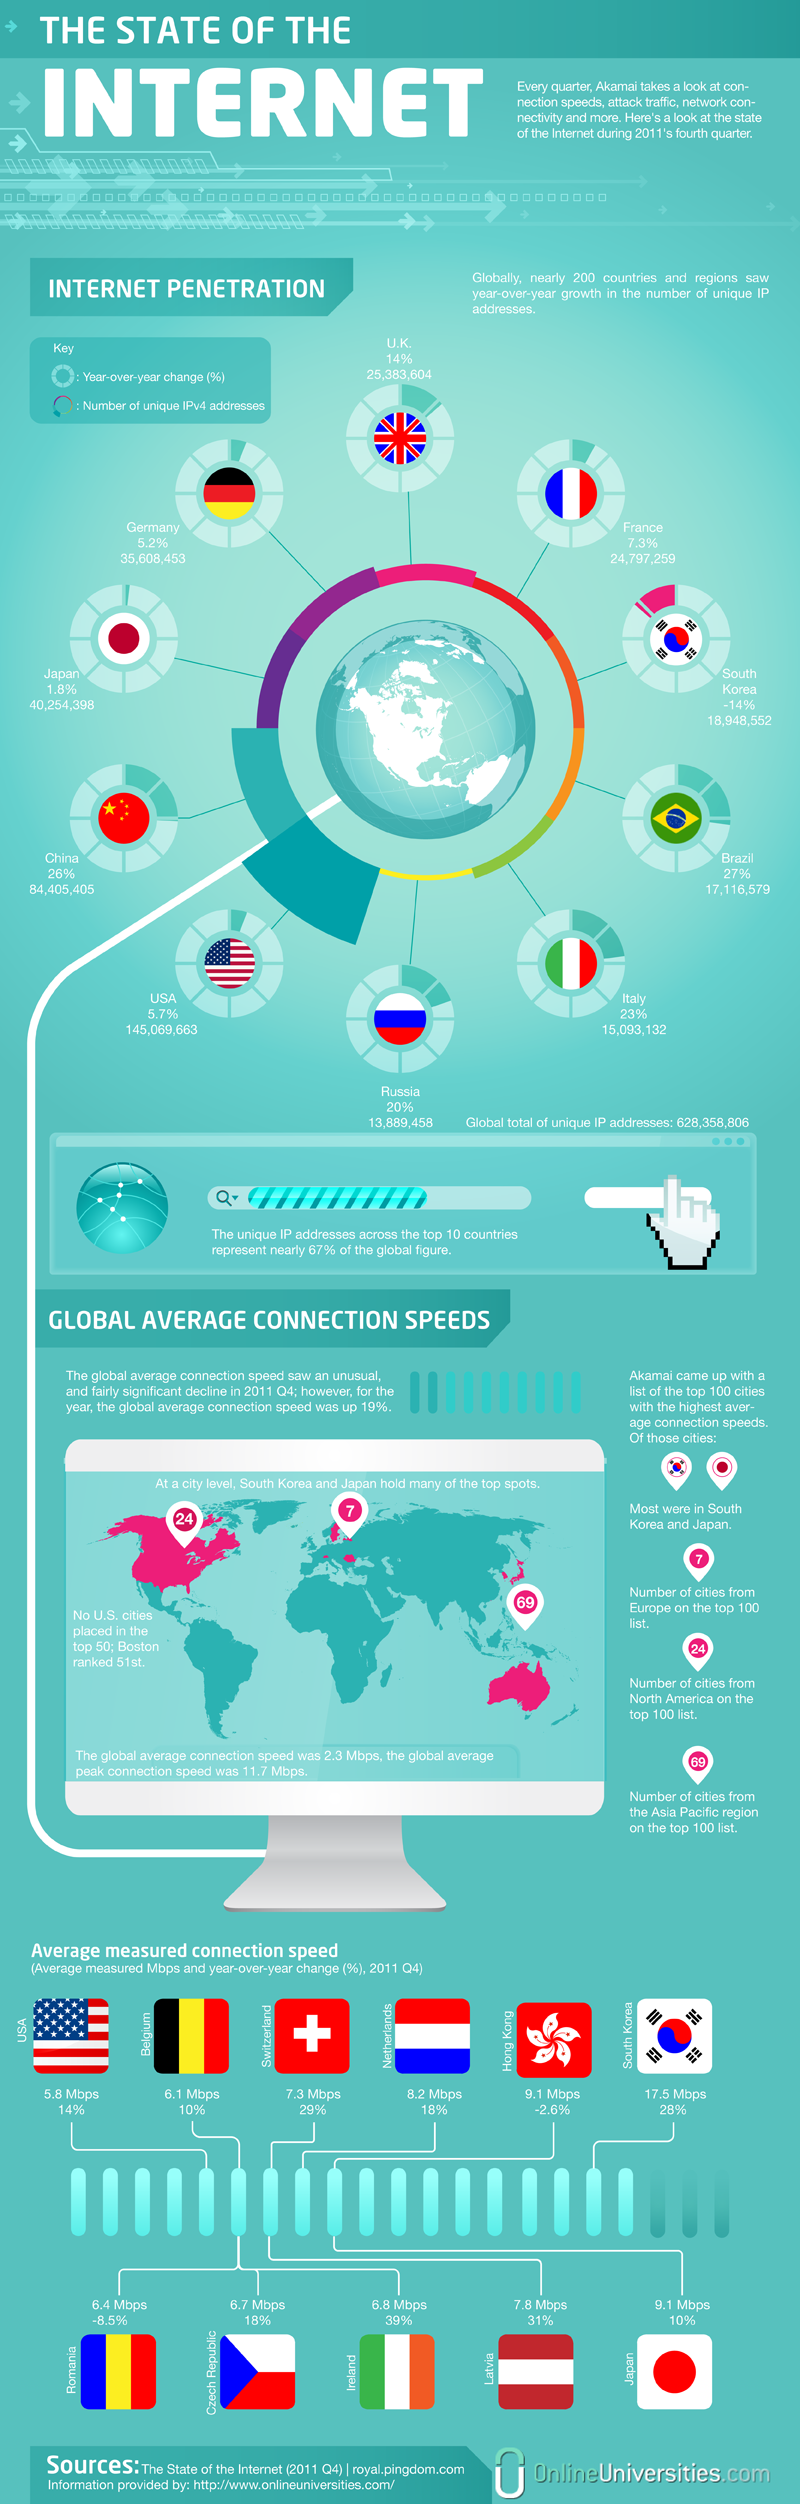 The State of the Internet Infographic